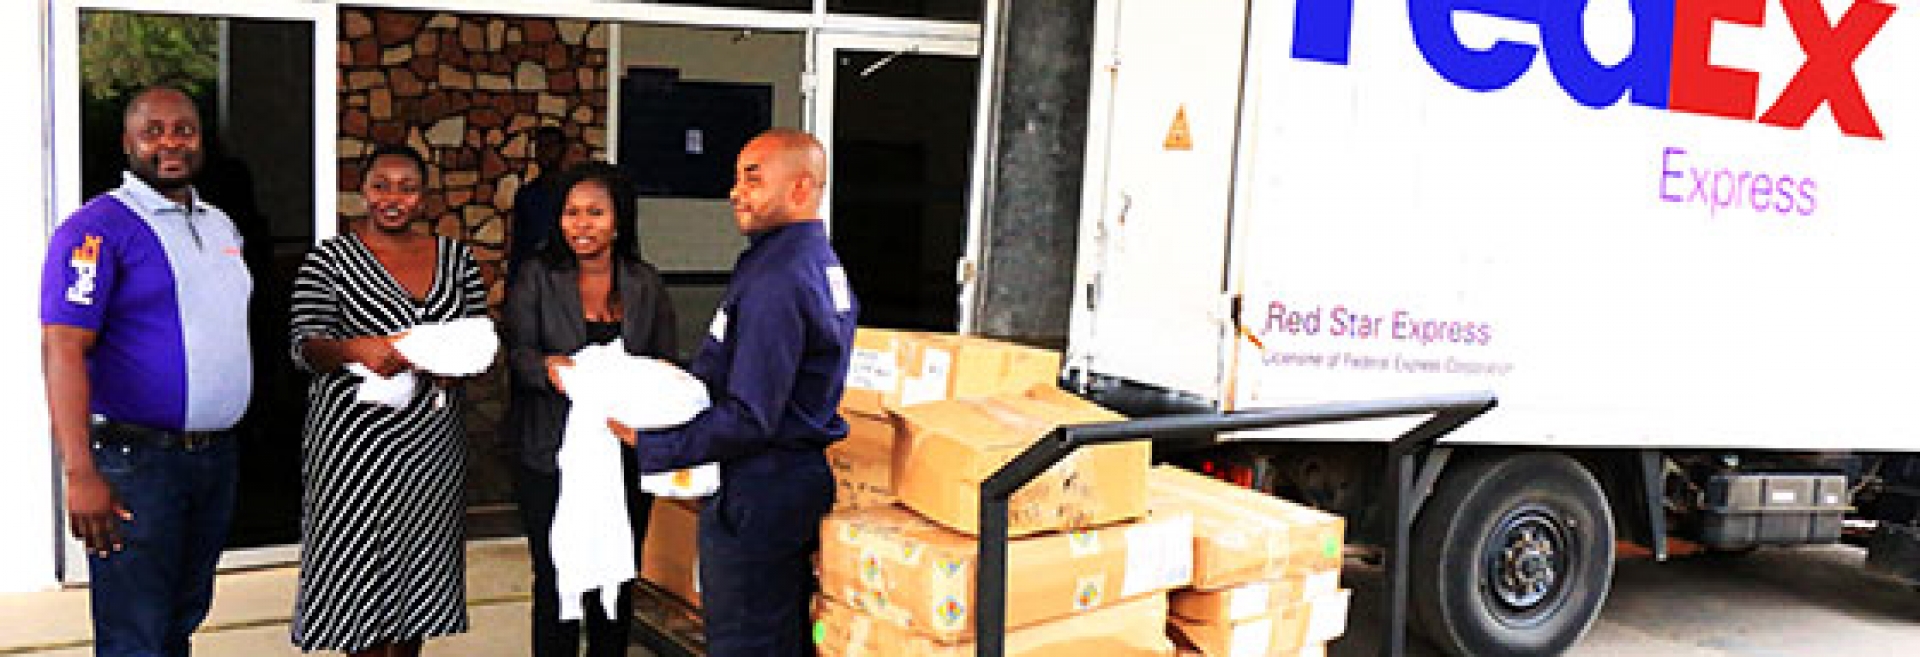 US Firms Vicki Marsha, FedEx, Donate to AUN’s Feed and Read Program for Girls